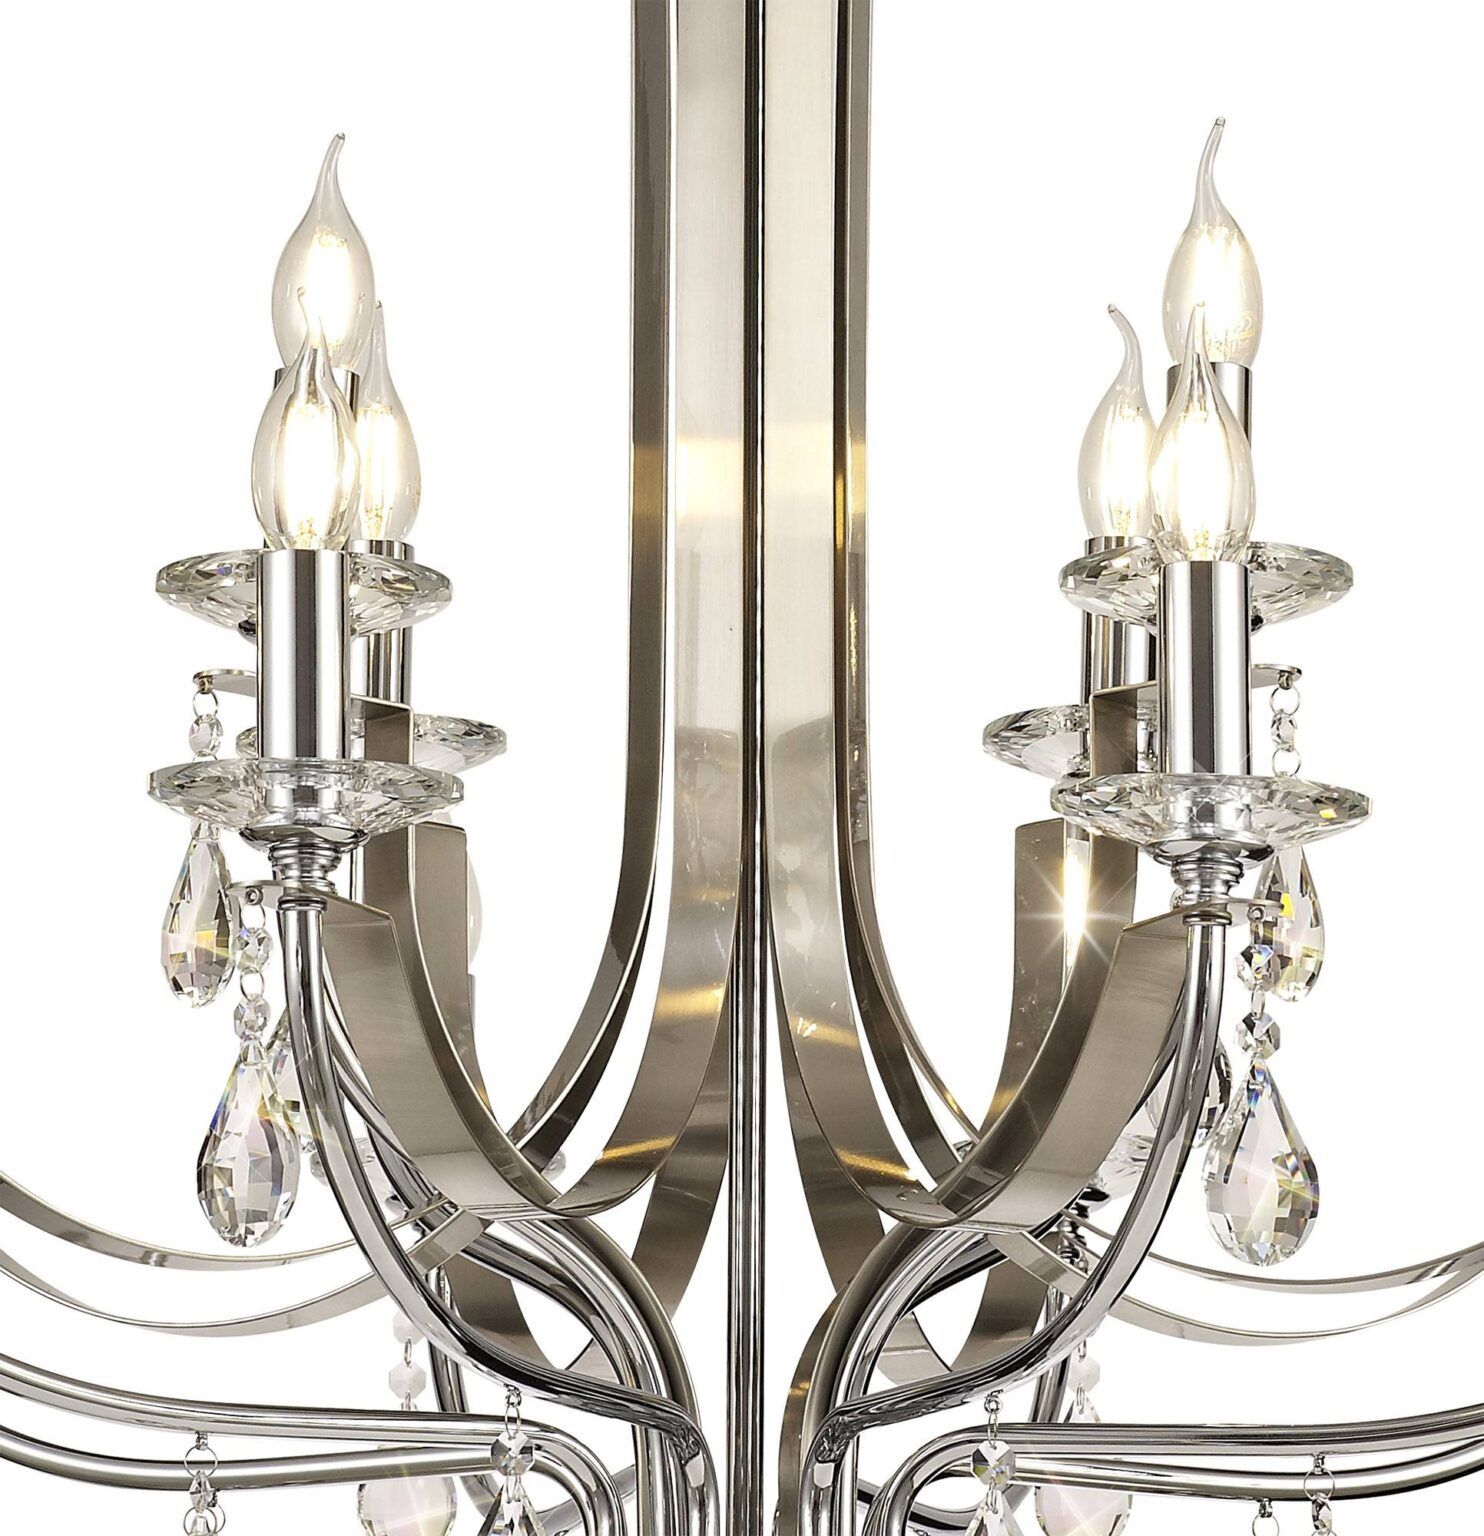 Avilia Pendant 12 Light E14 Polished Chrome/Satin Nickel With Satin Nickel Crystal Chandeliers (View 15 of 15)